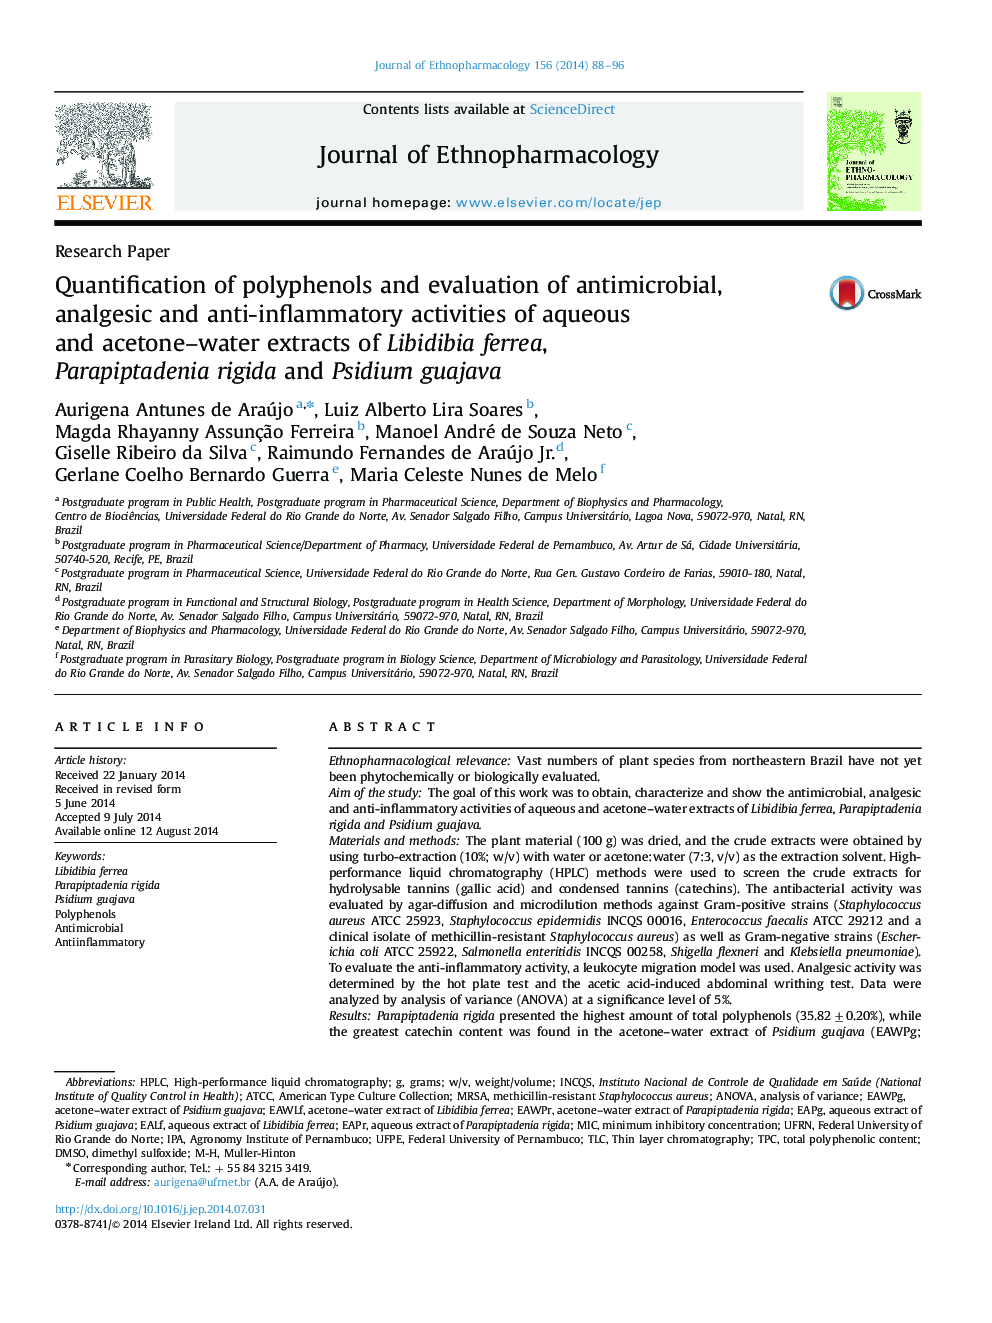 Quantification of polyphenols and evaluation of antimicrobial, analgesic and anti-inflammatory activities of aqueous and acetone–water extracts of Libidibia ferrea, Parapiptadenia rigida and Psidium guajava